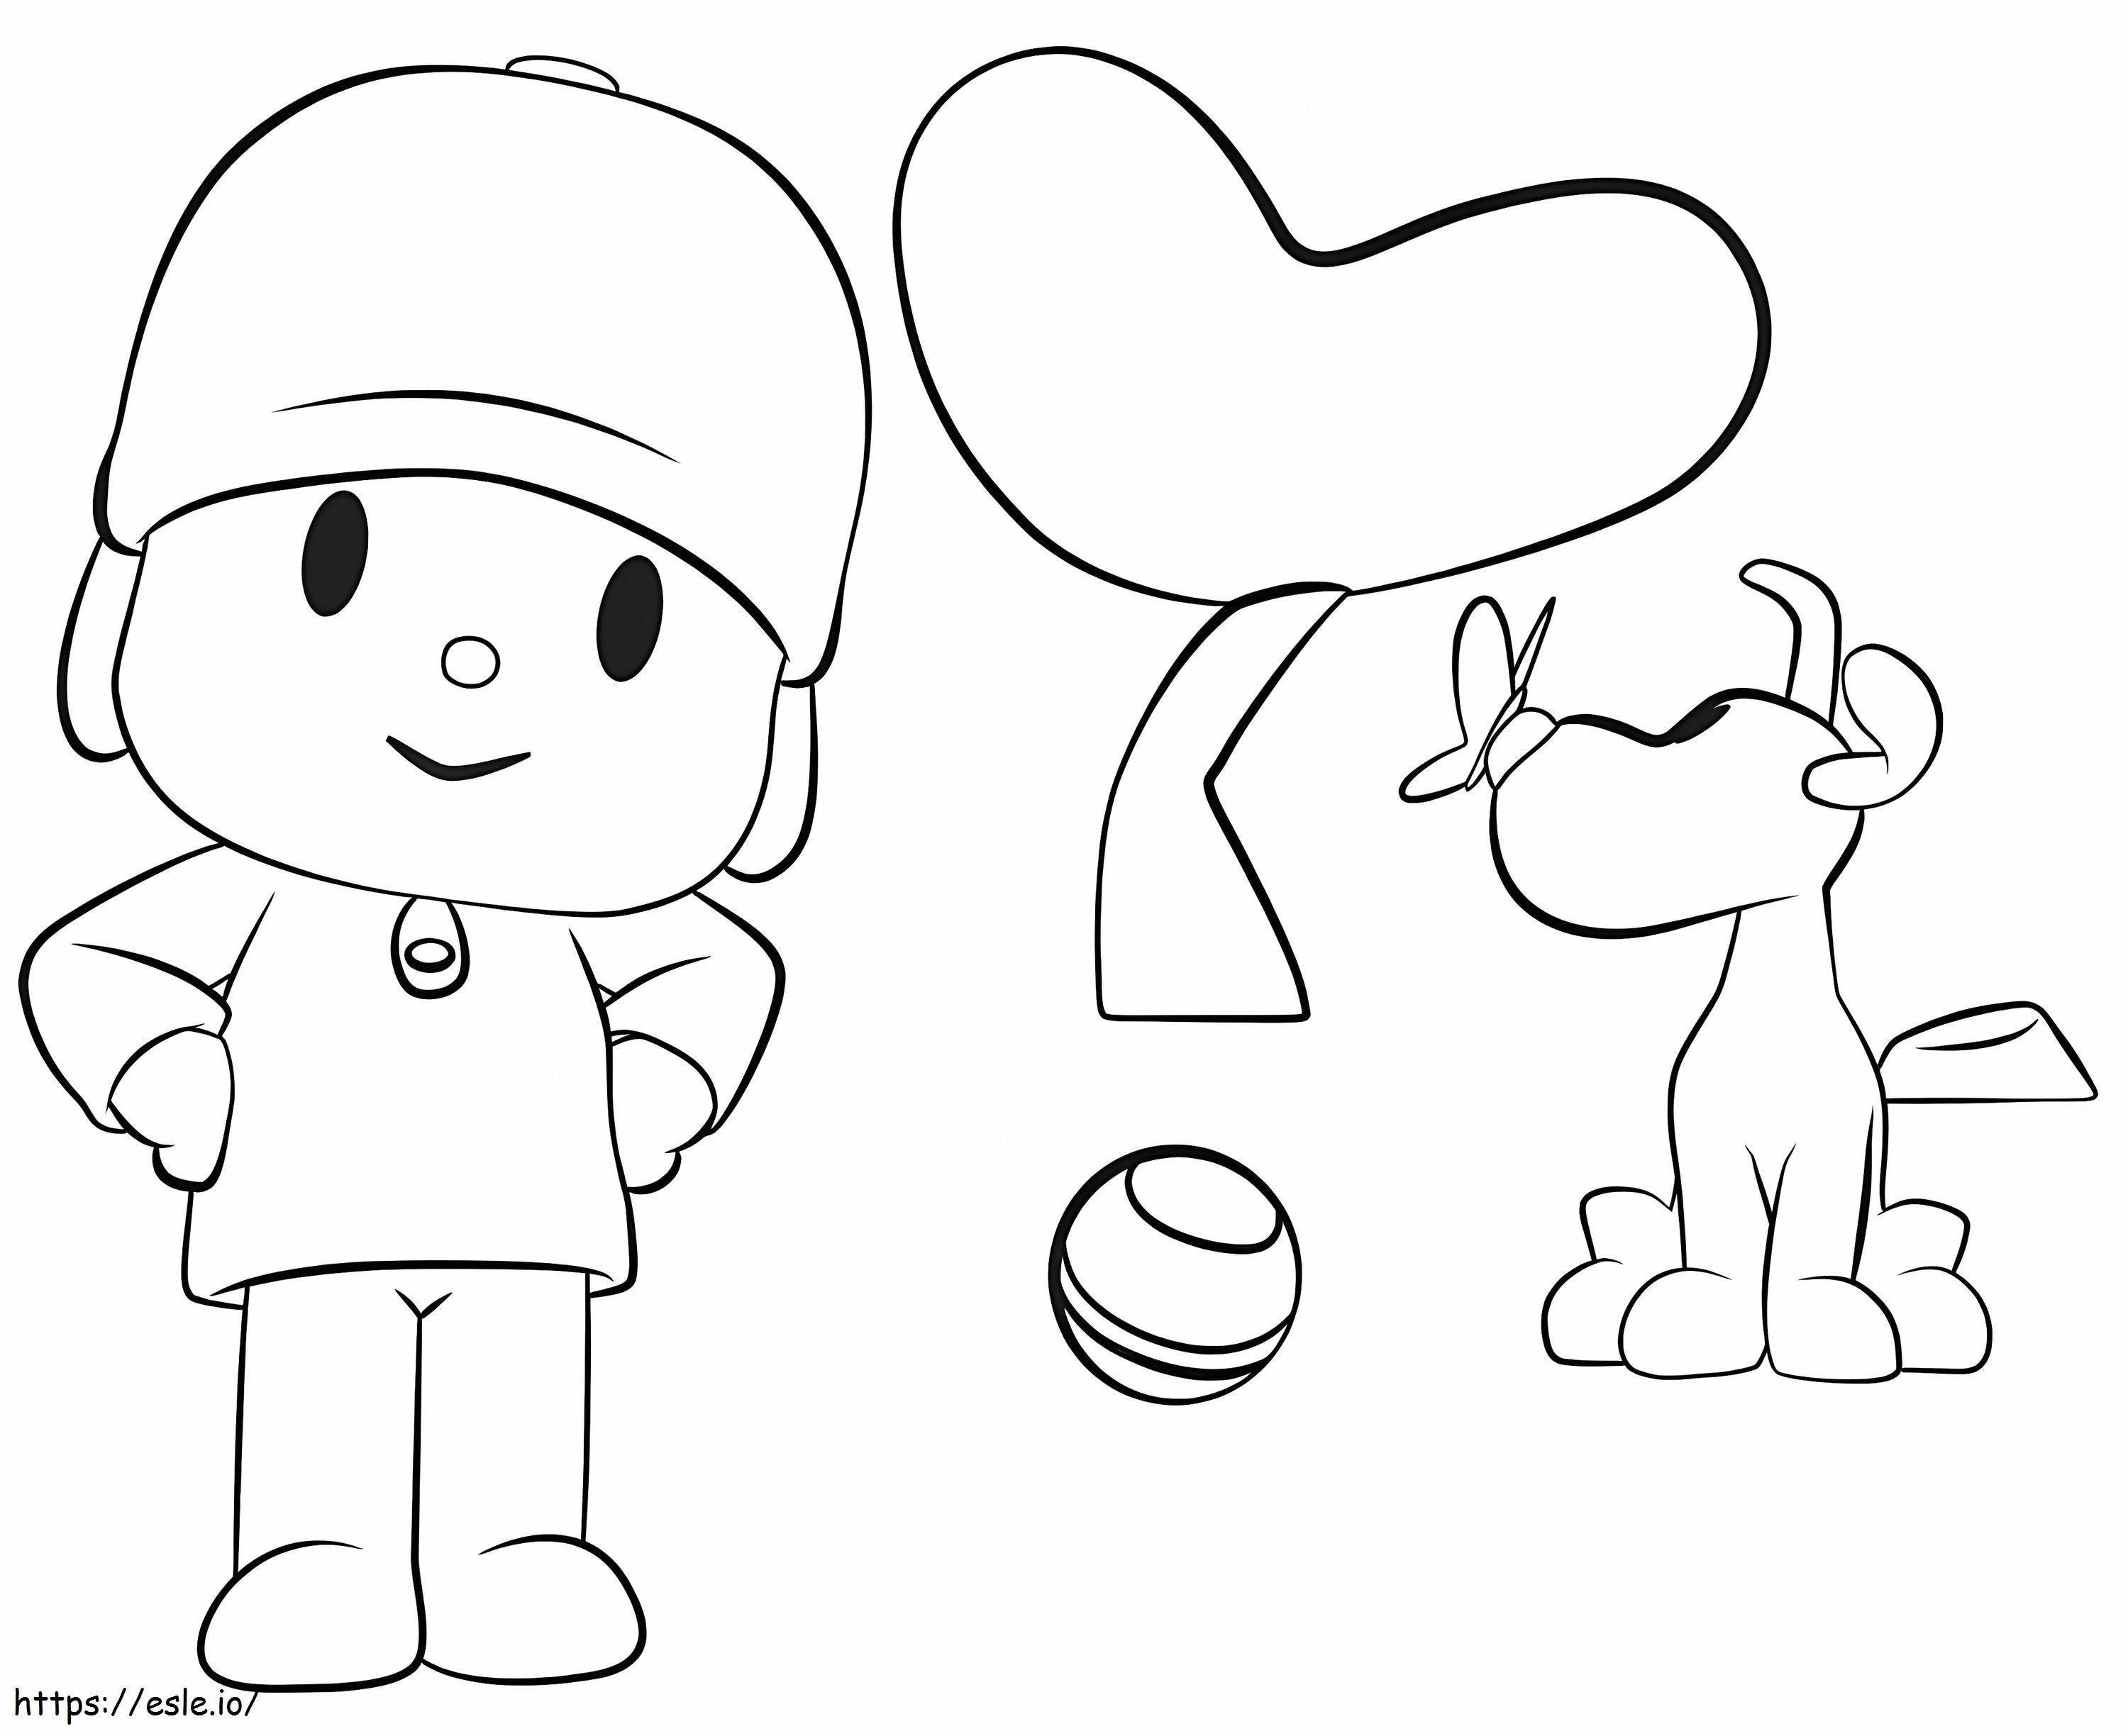 Loula And Pocoyo With Ball coloring page